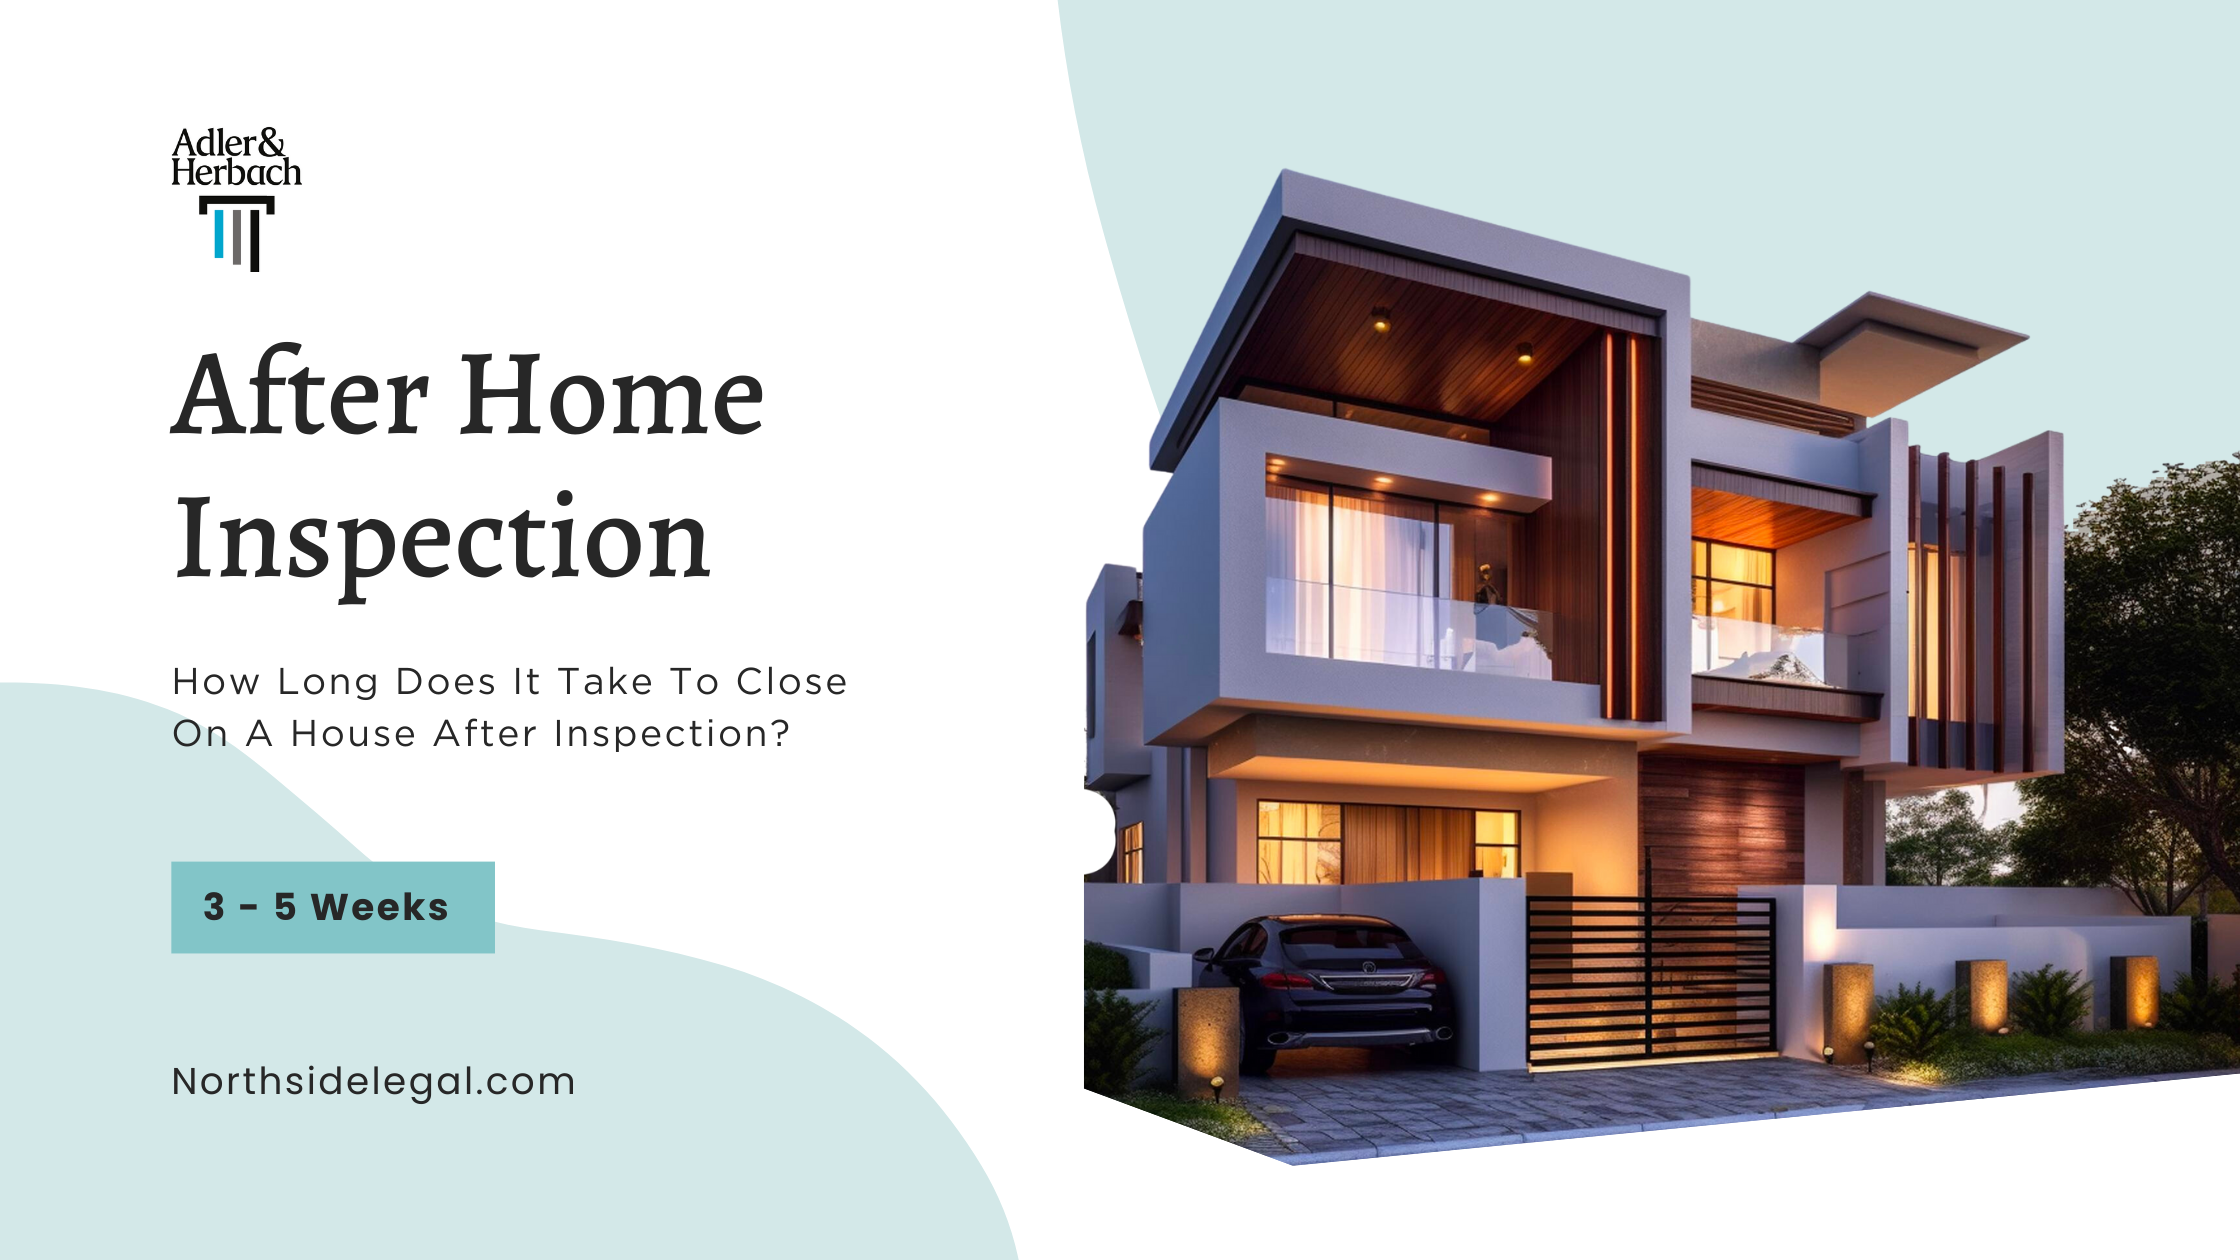 How Long It Takes To Close On A House After Inspection?